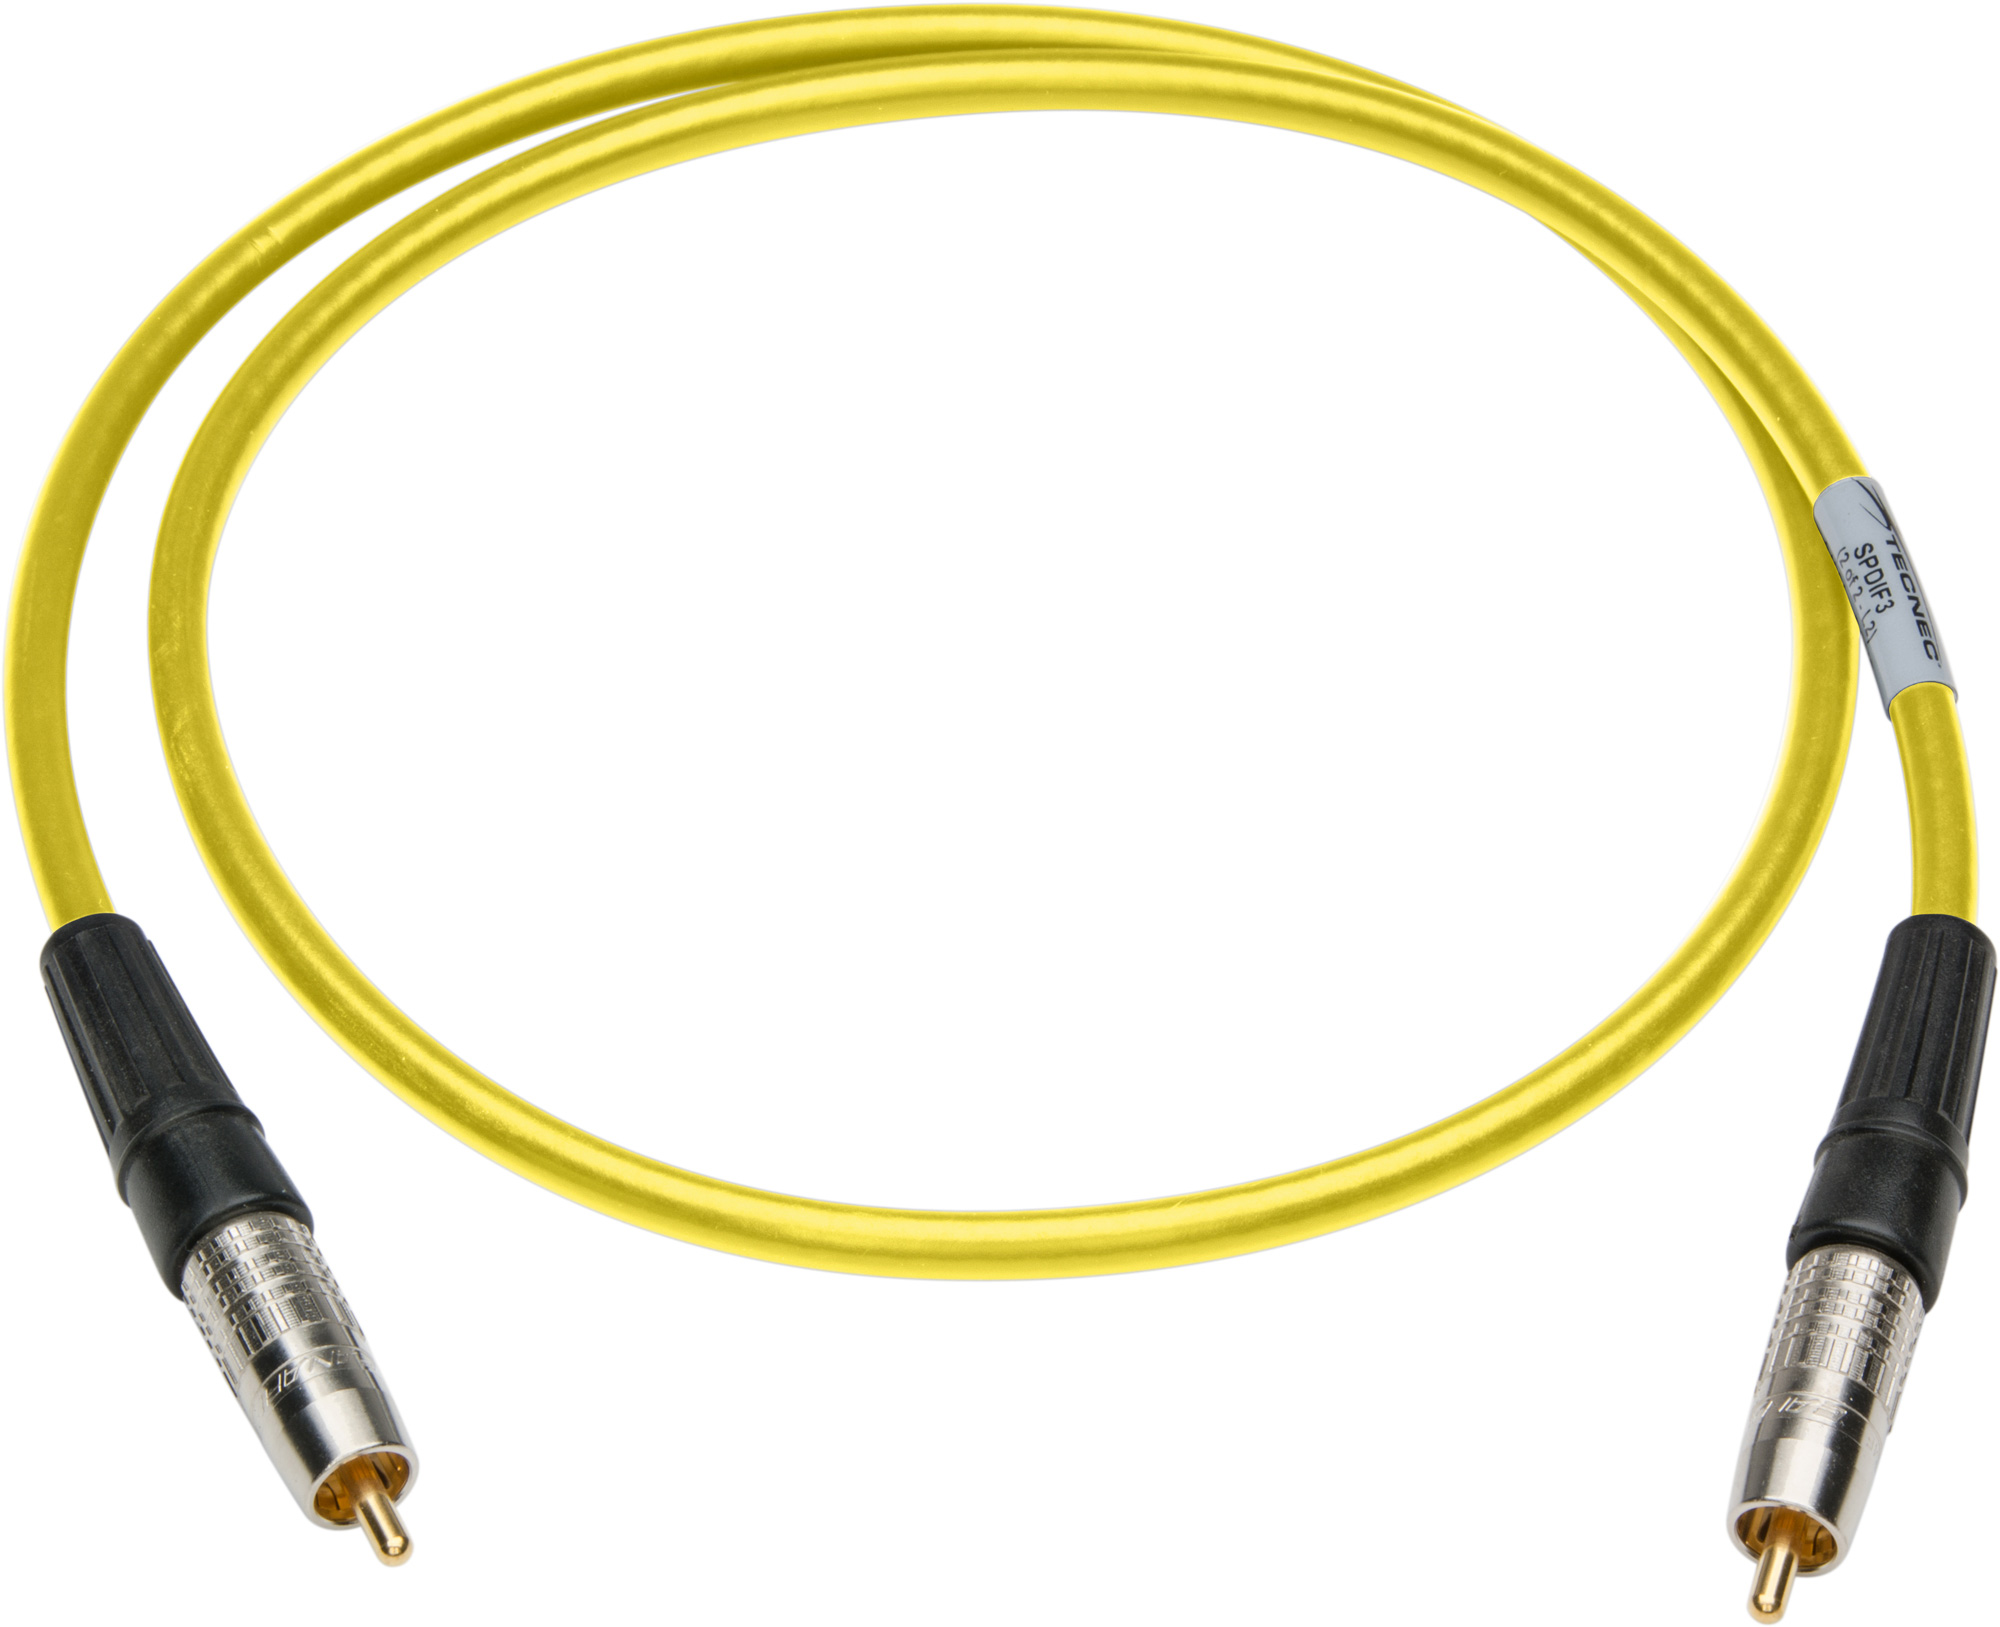 40 Foot SPDIF RCA Male to Male Digital Audio Cable - YELLOW SPDIF40YW